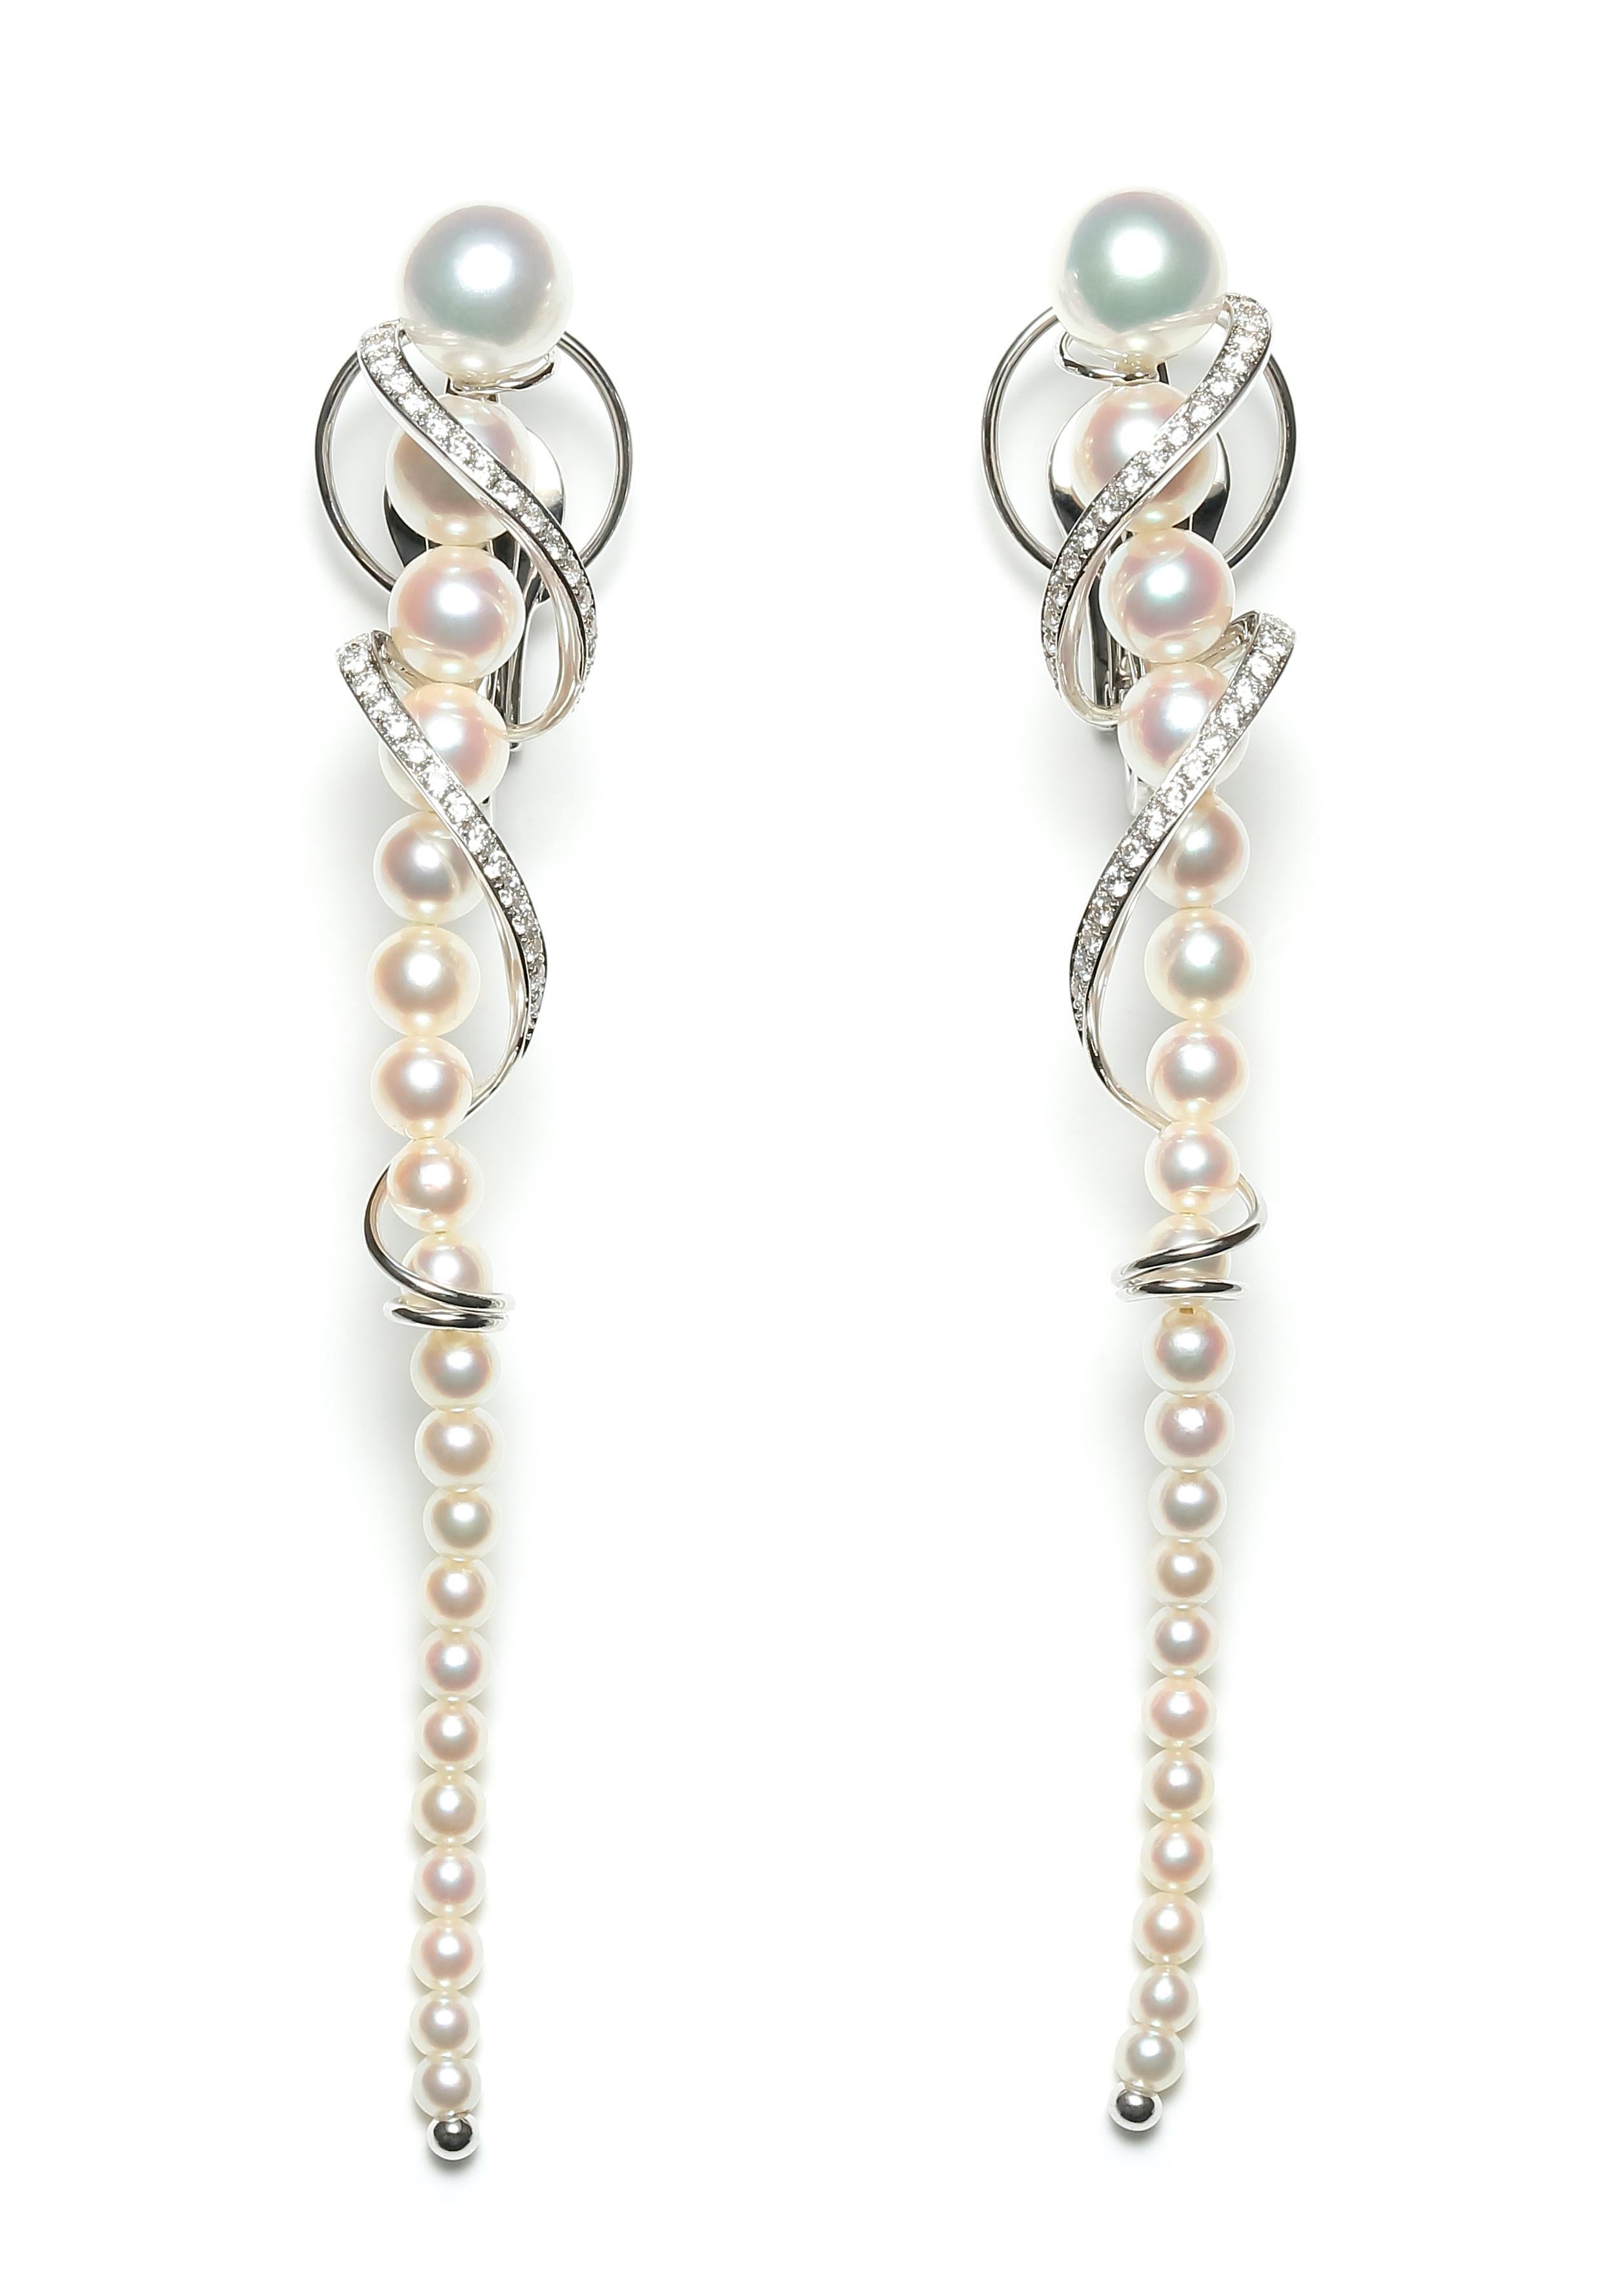 Akoya Pearl & Diamond Conch Twist Earrings

Each pearl is hand- picked and matched to ensure perfect harmony in color and size to create lively jewellery. Fun and flirty this creation features Baby Akoya Pearls that stand out for their little size,